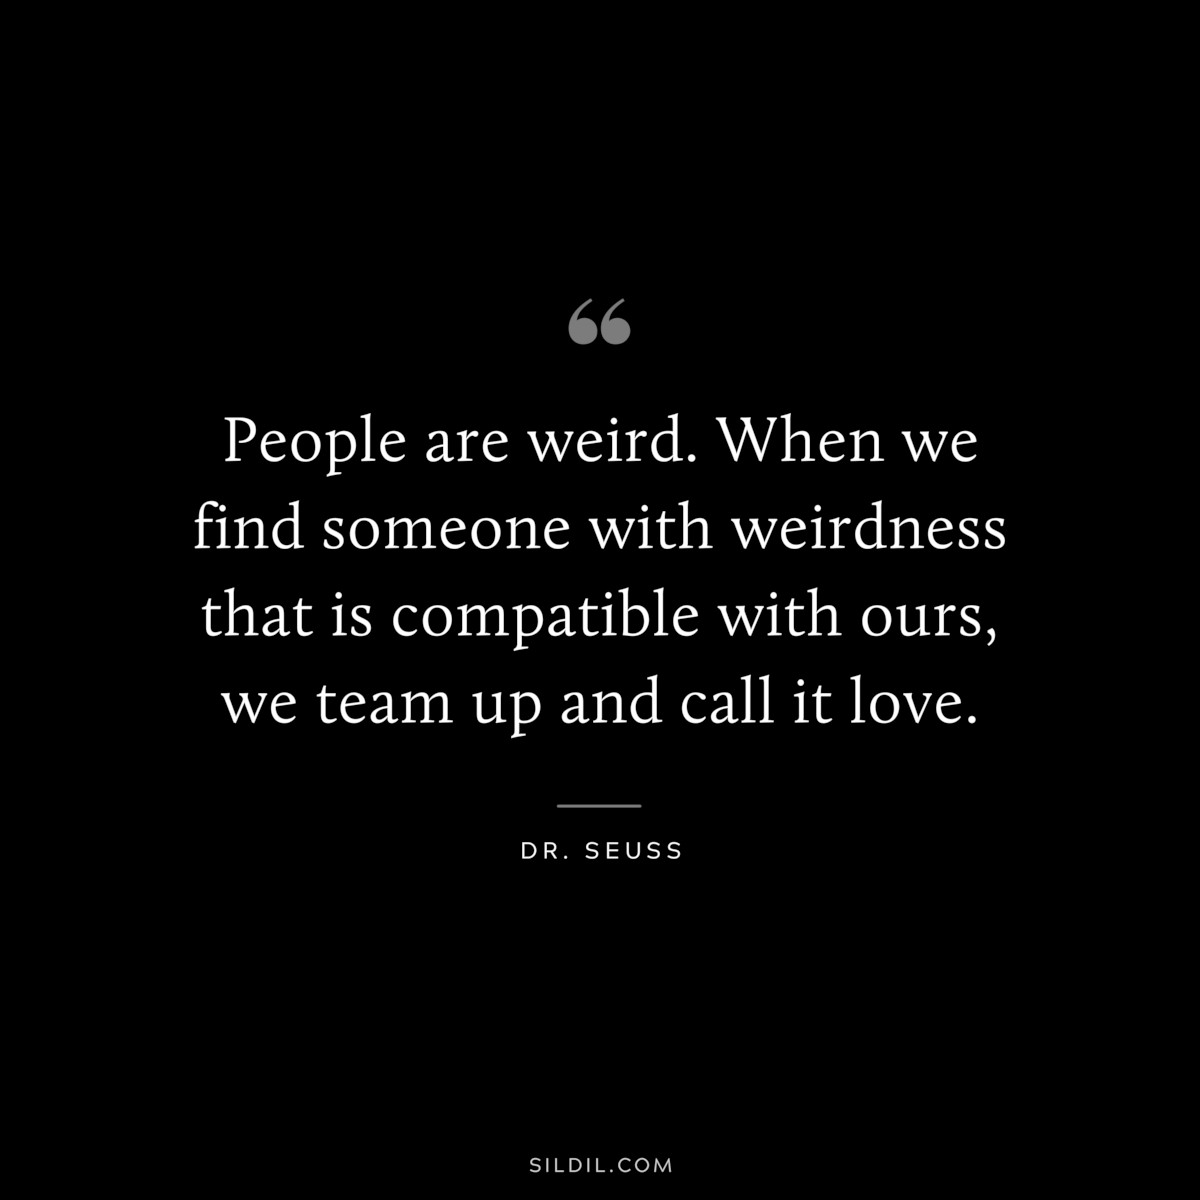 People are weird. When we find someone with weirdness that is compatible with ours, we team up and call it love. ― Dr. Seuss